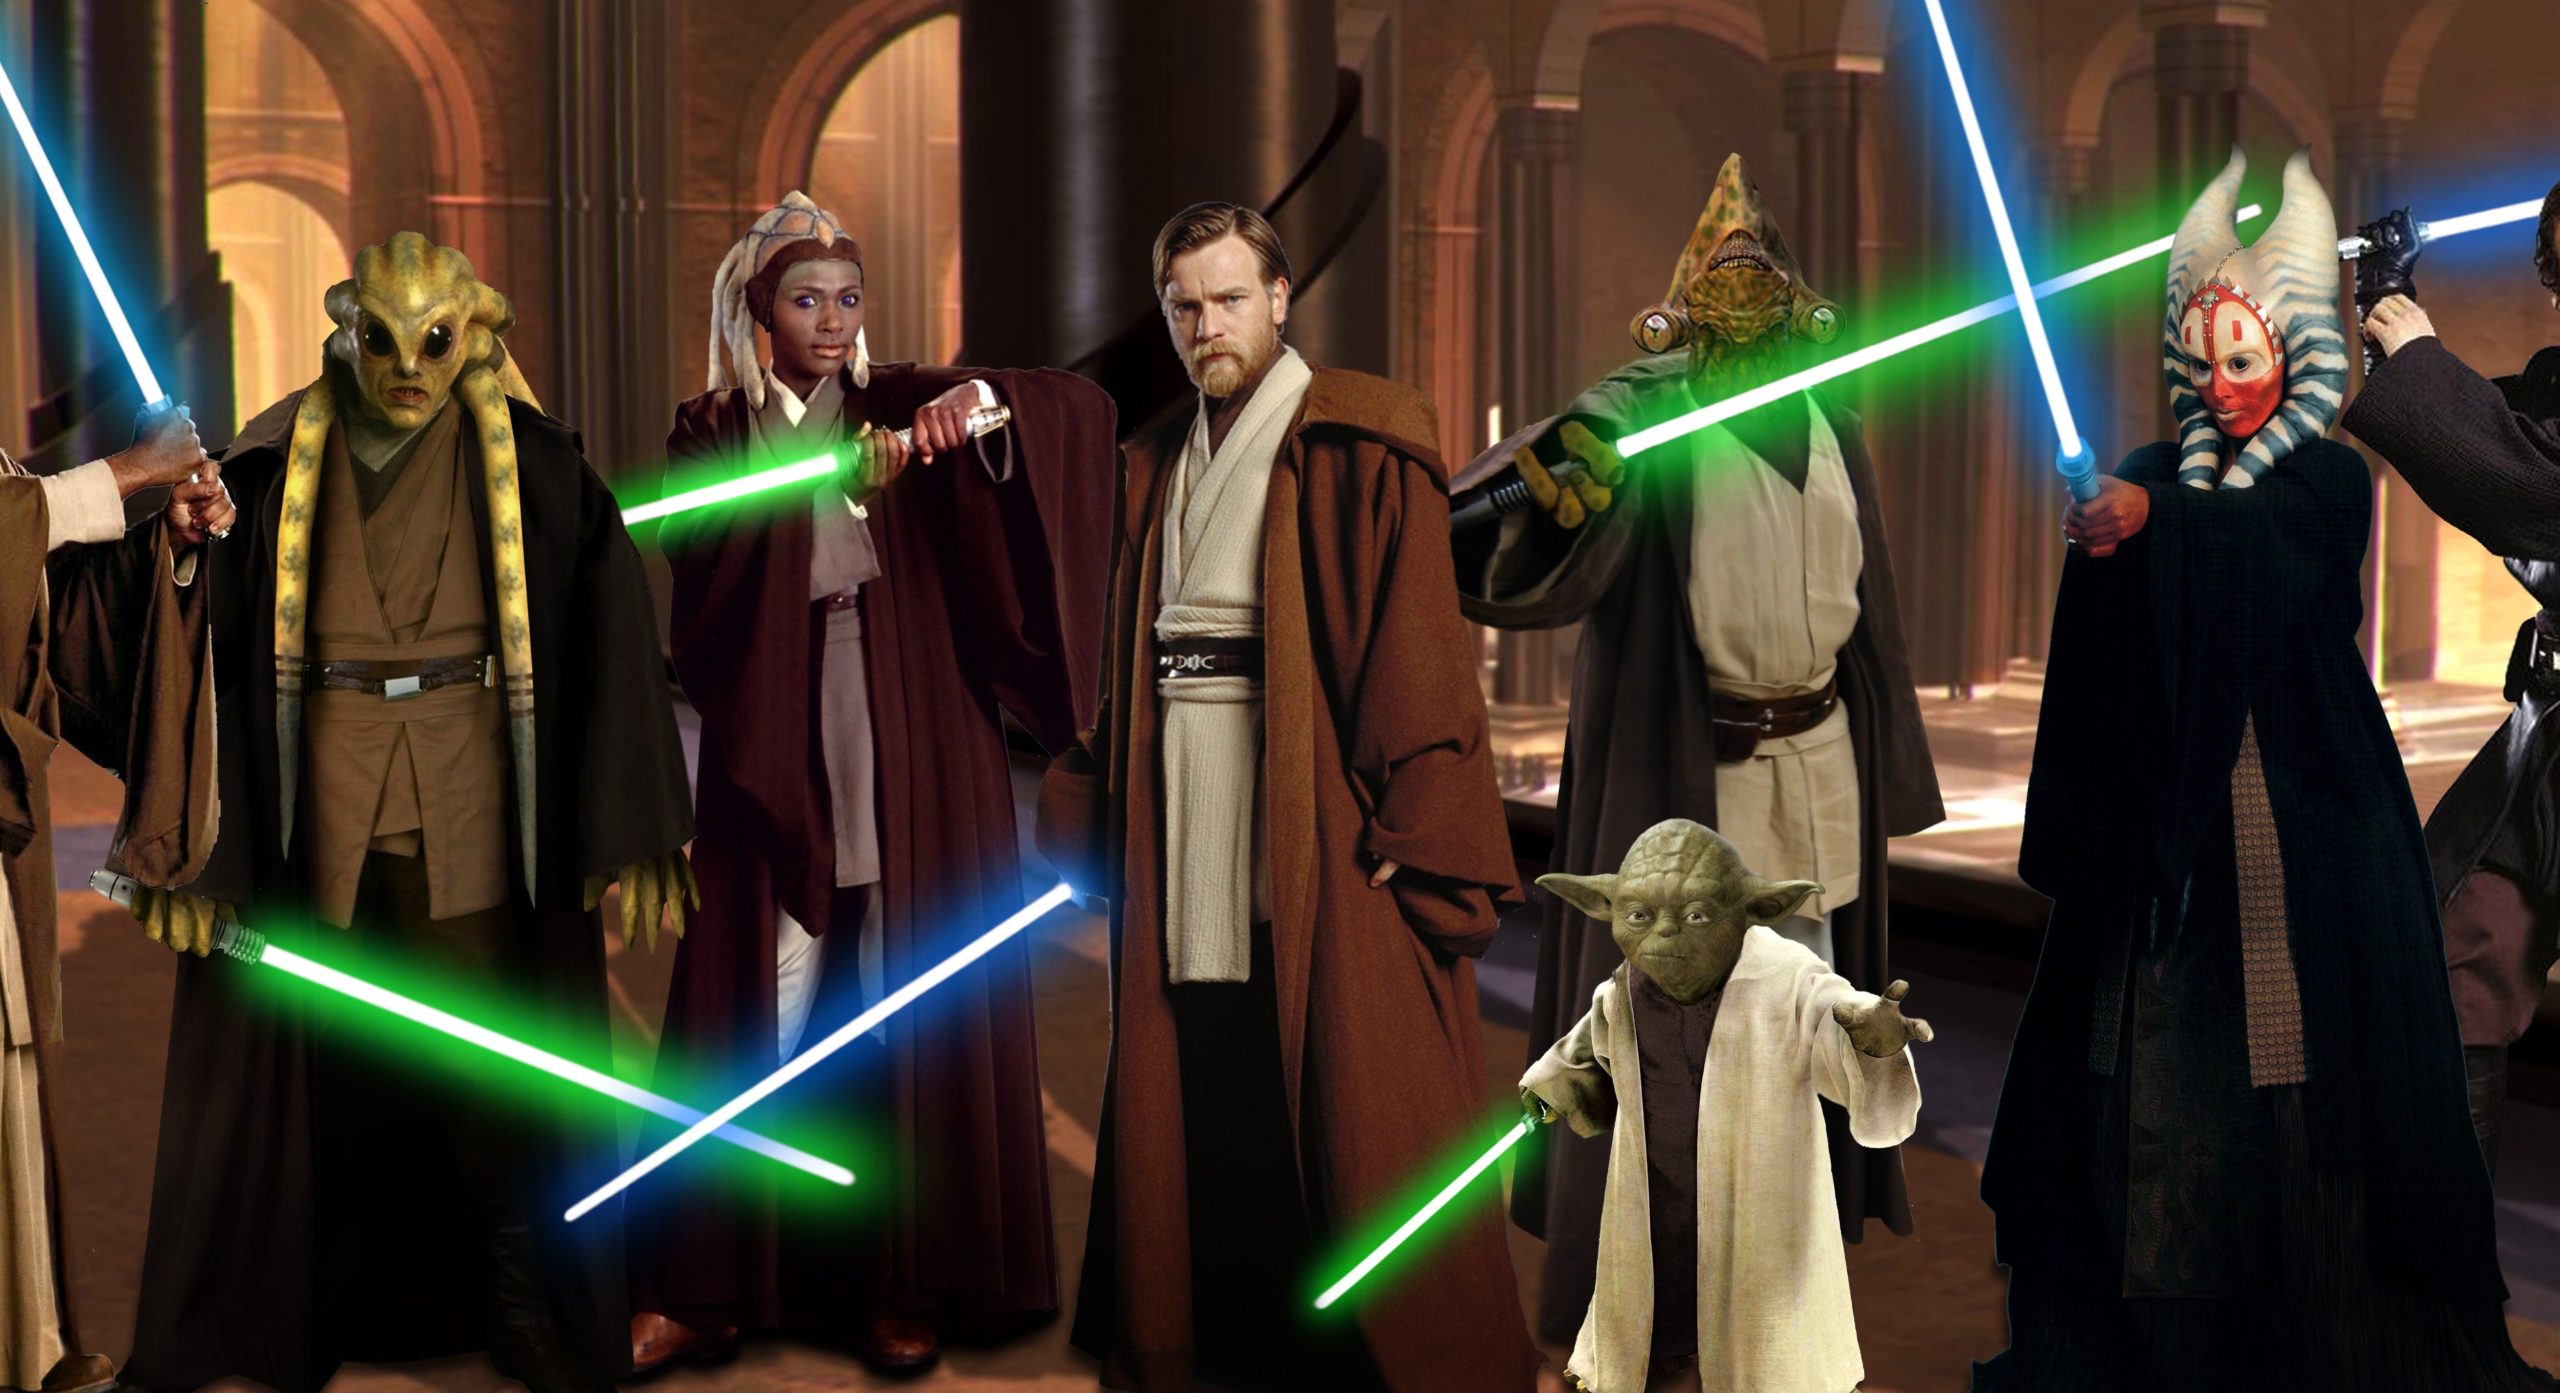 Who is the most powerful Jedi?